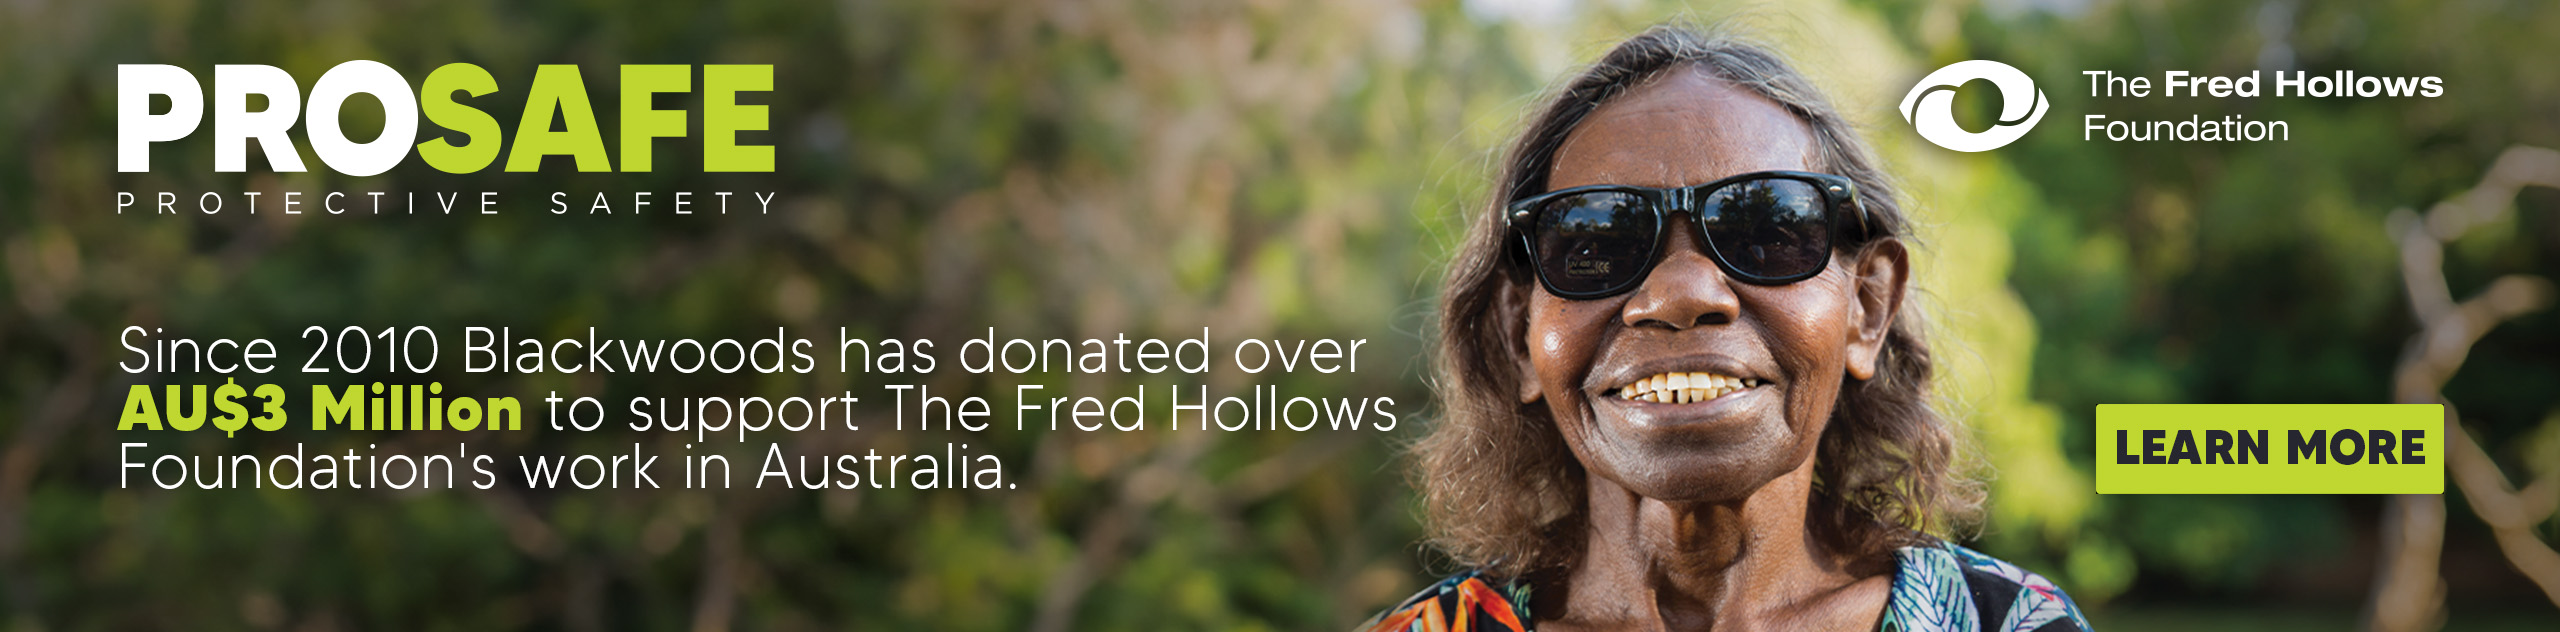 The Fred Hollows Foundation and Blackwoods 